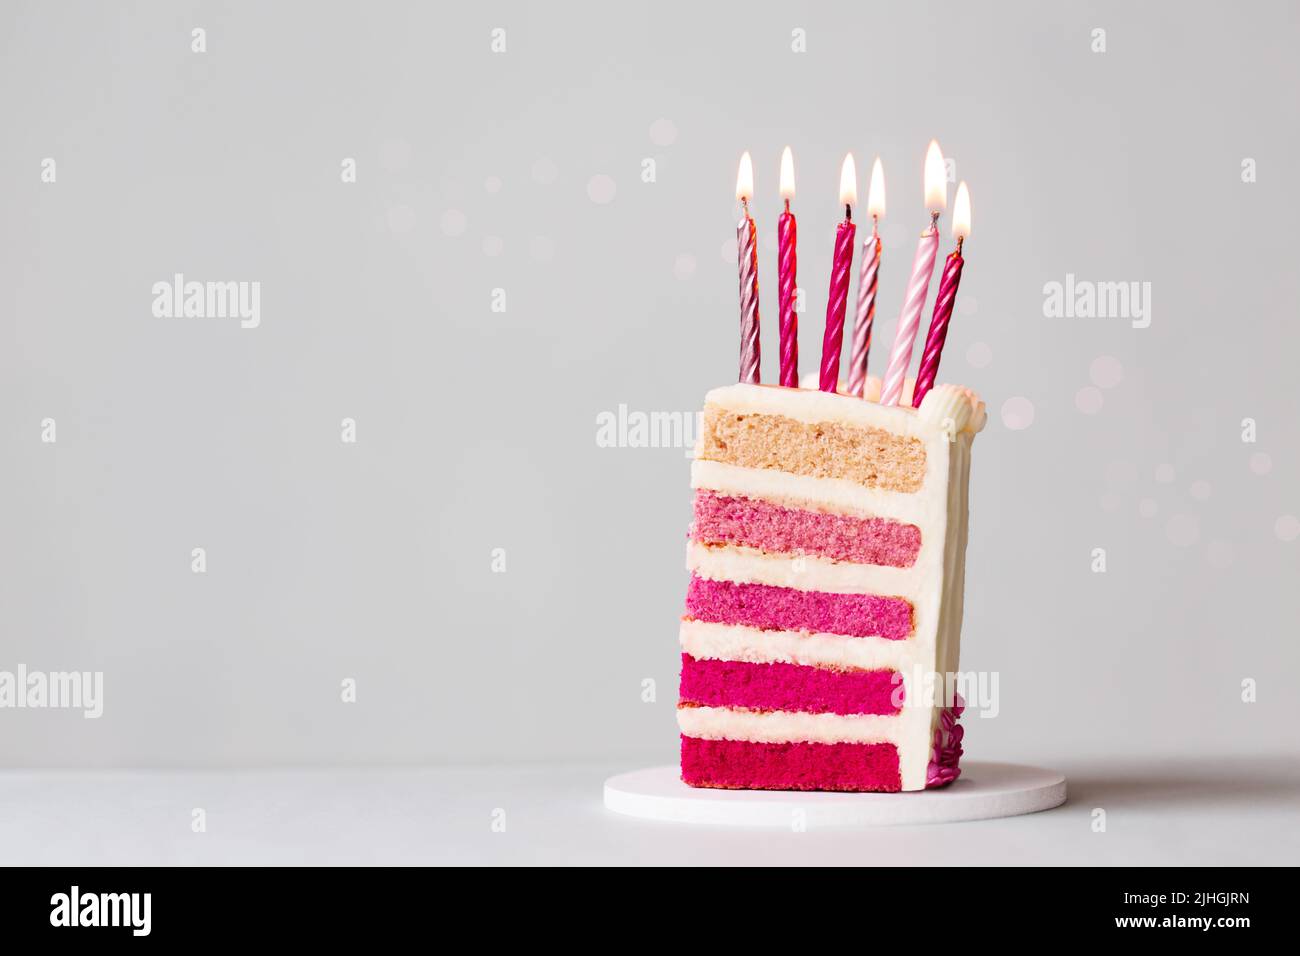 Slice of pink ombre birthday cake with six pink birthday candles to celebrate a birthday Stock Photo